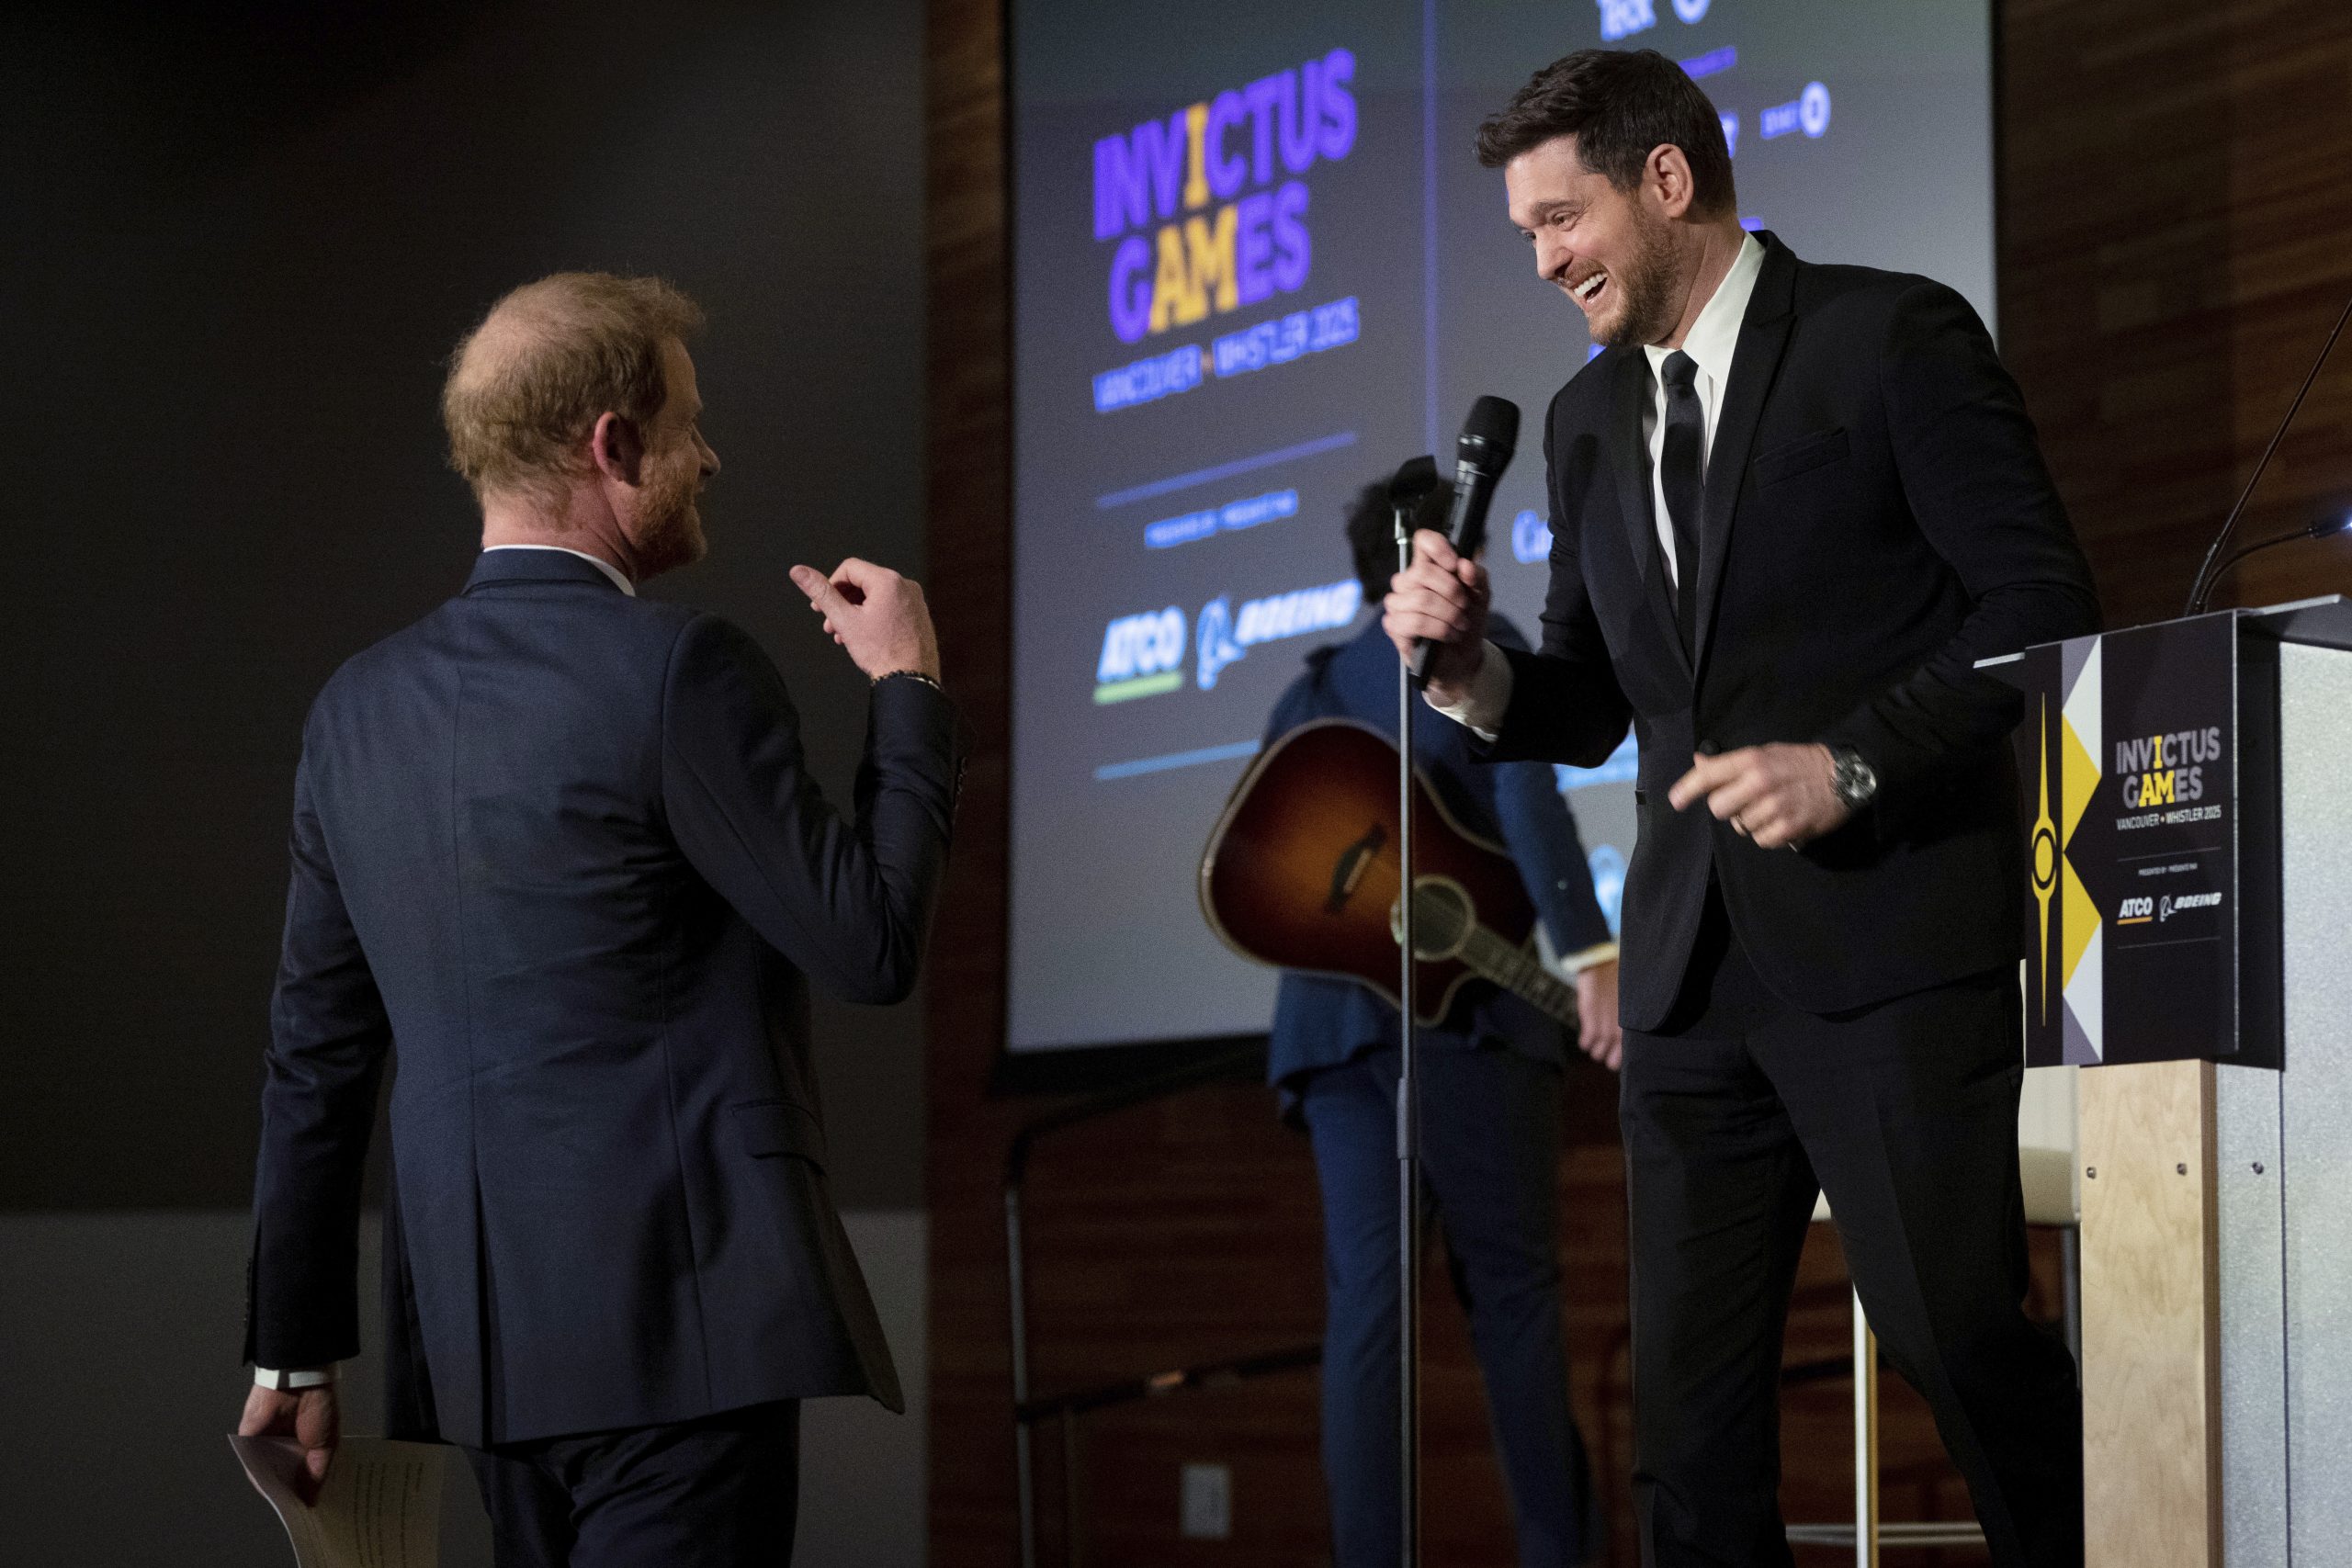 Meghan Markle & Prince Harry serenaded by Michael Buble as singer calls duke a ‘visionary’ for doing things ‘his way’